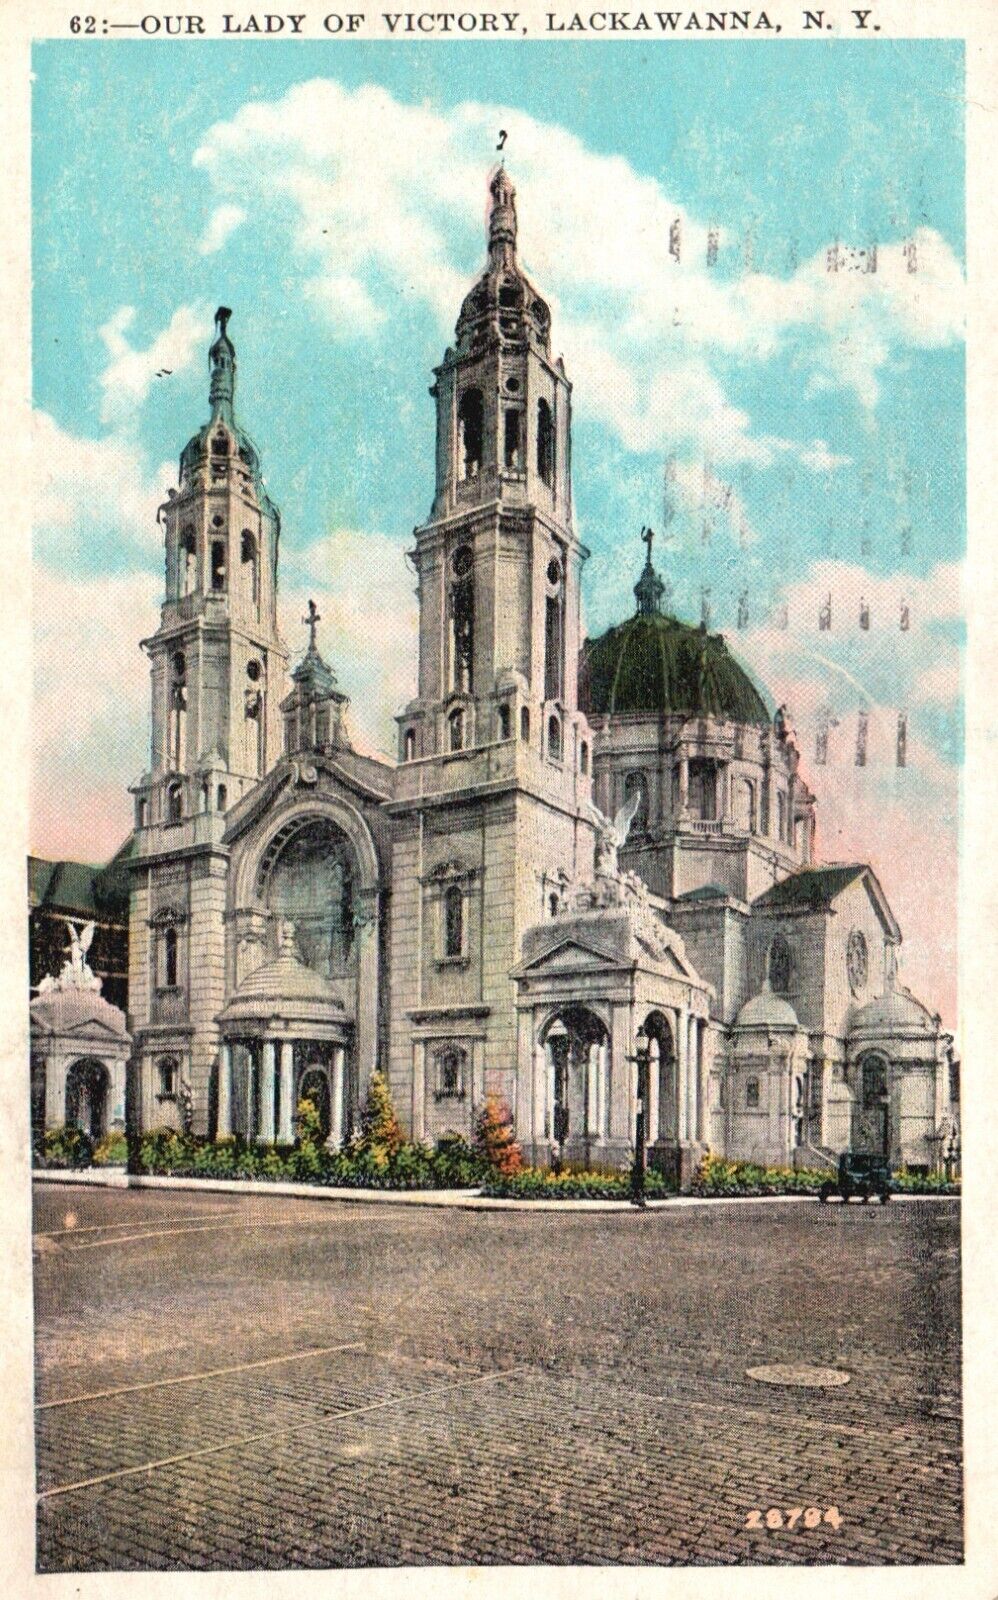 Postcard NY Lackawanna Our Lady of Victory 1928 White Border Vintage PC J1229